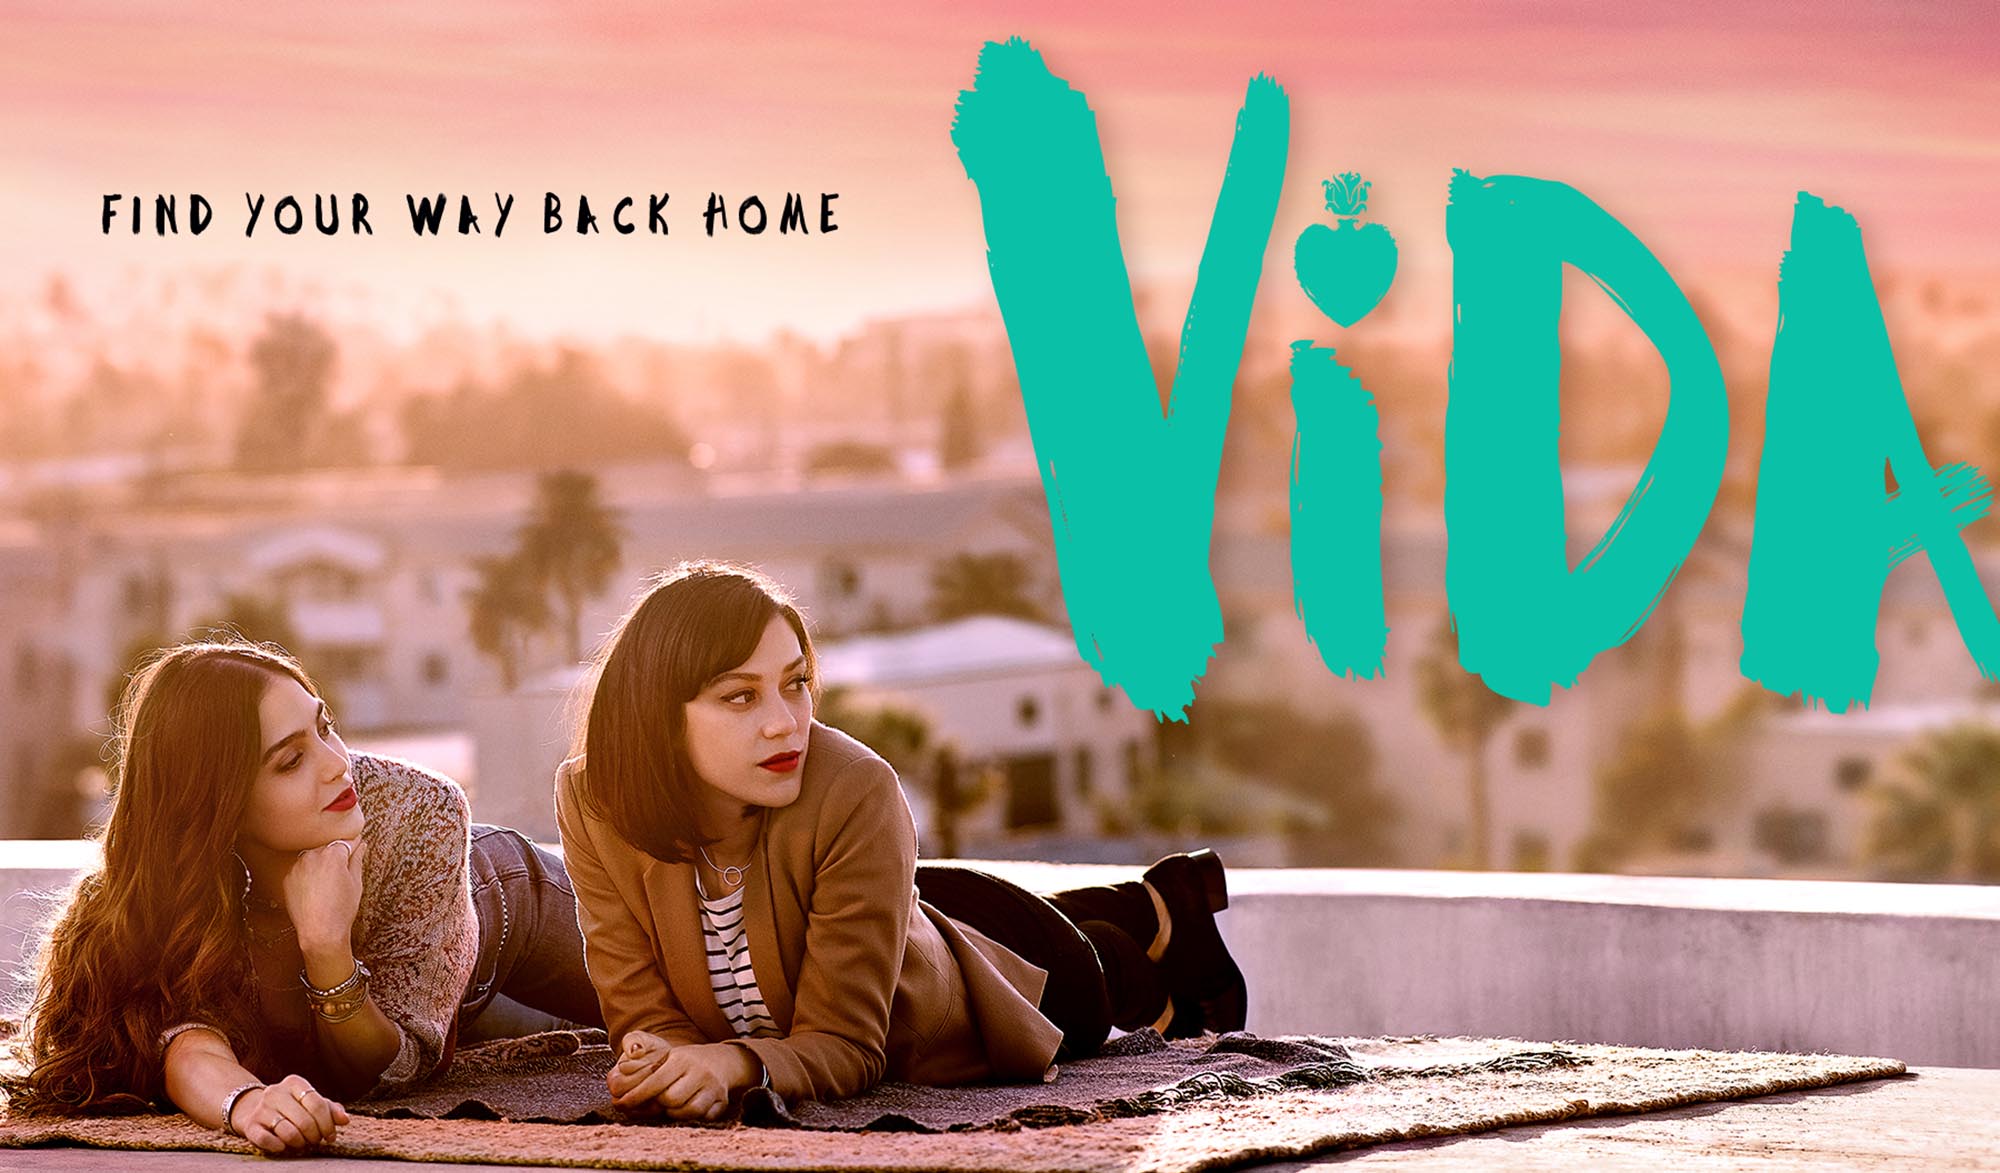 Happy May Day everyone! For most people, today marks the start of summer. But for the fellowship of the bingewatchers, it marks a new month of fresh content. One such show we’re excited about is the upcoming drama 'Vida', which was first announced by Starz back in 2016.